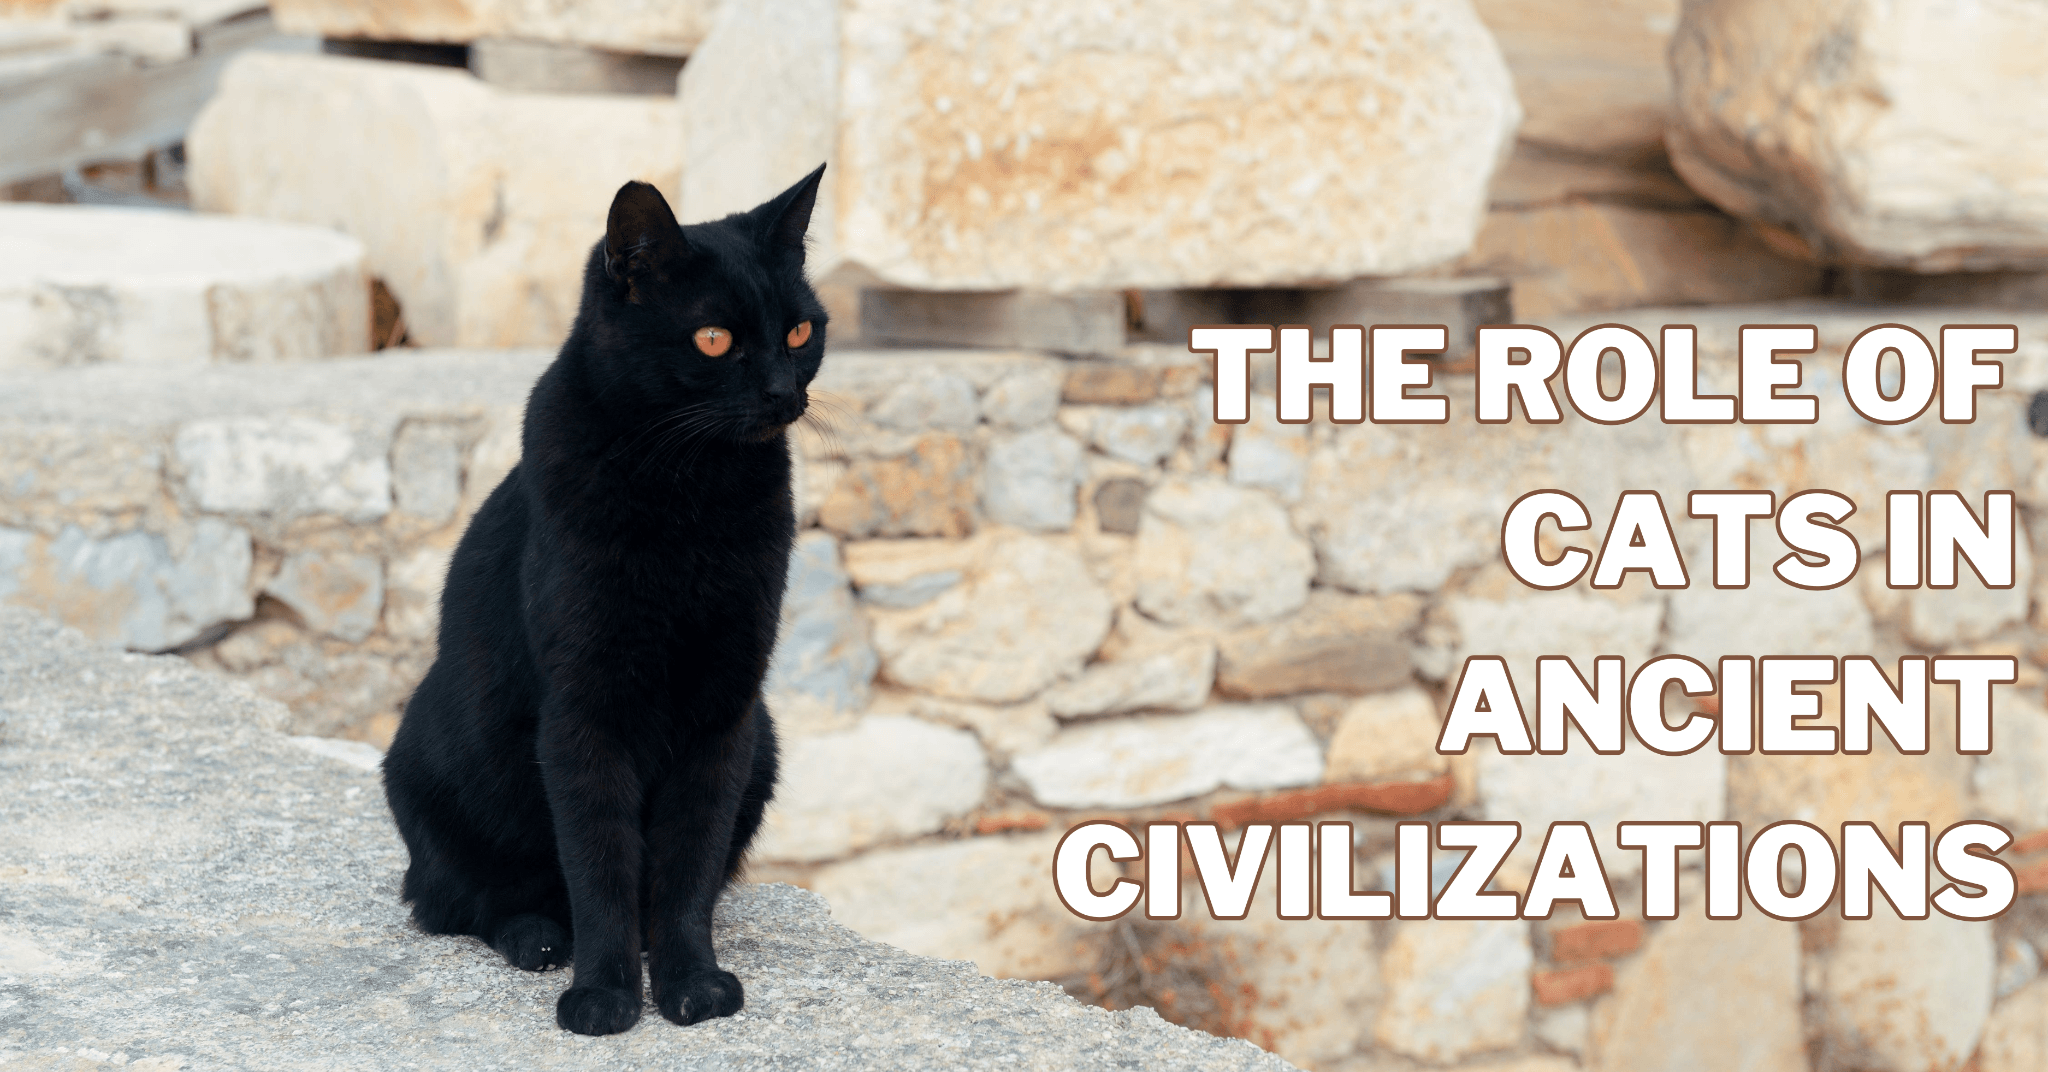 The Role Of Cats In Ancient Civilizations